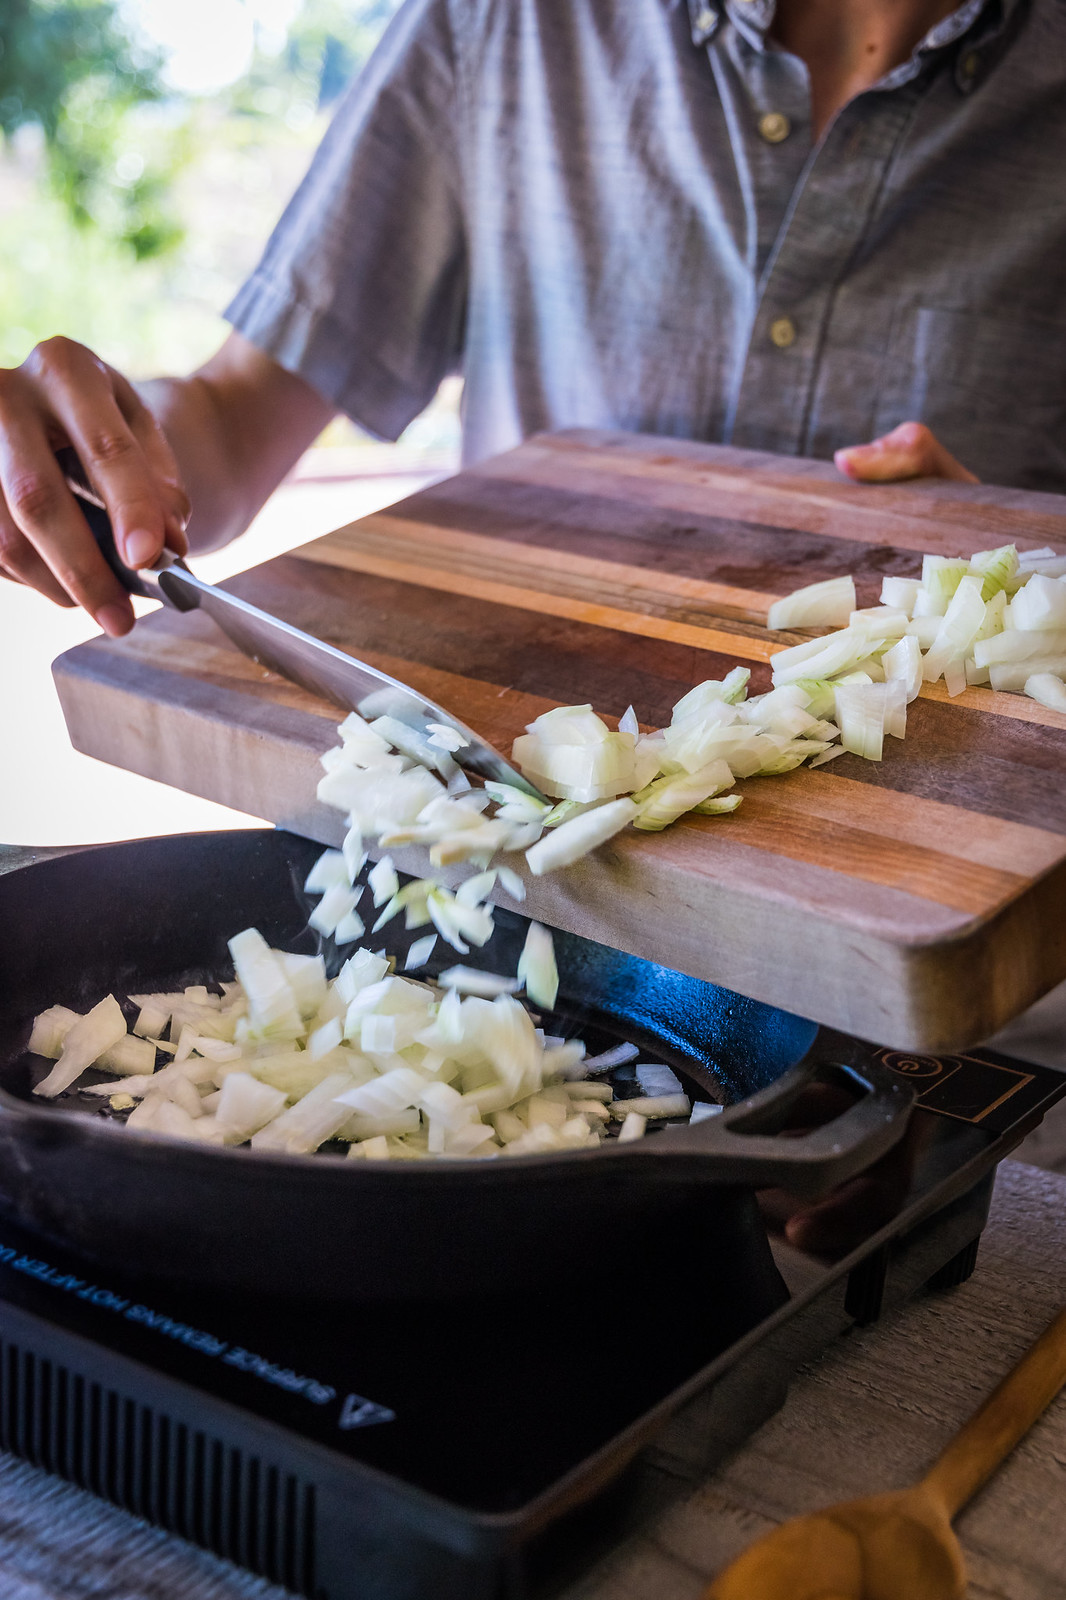 adding onions to the hot pan